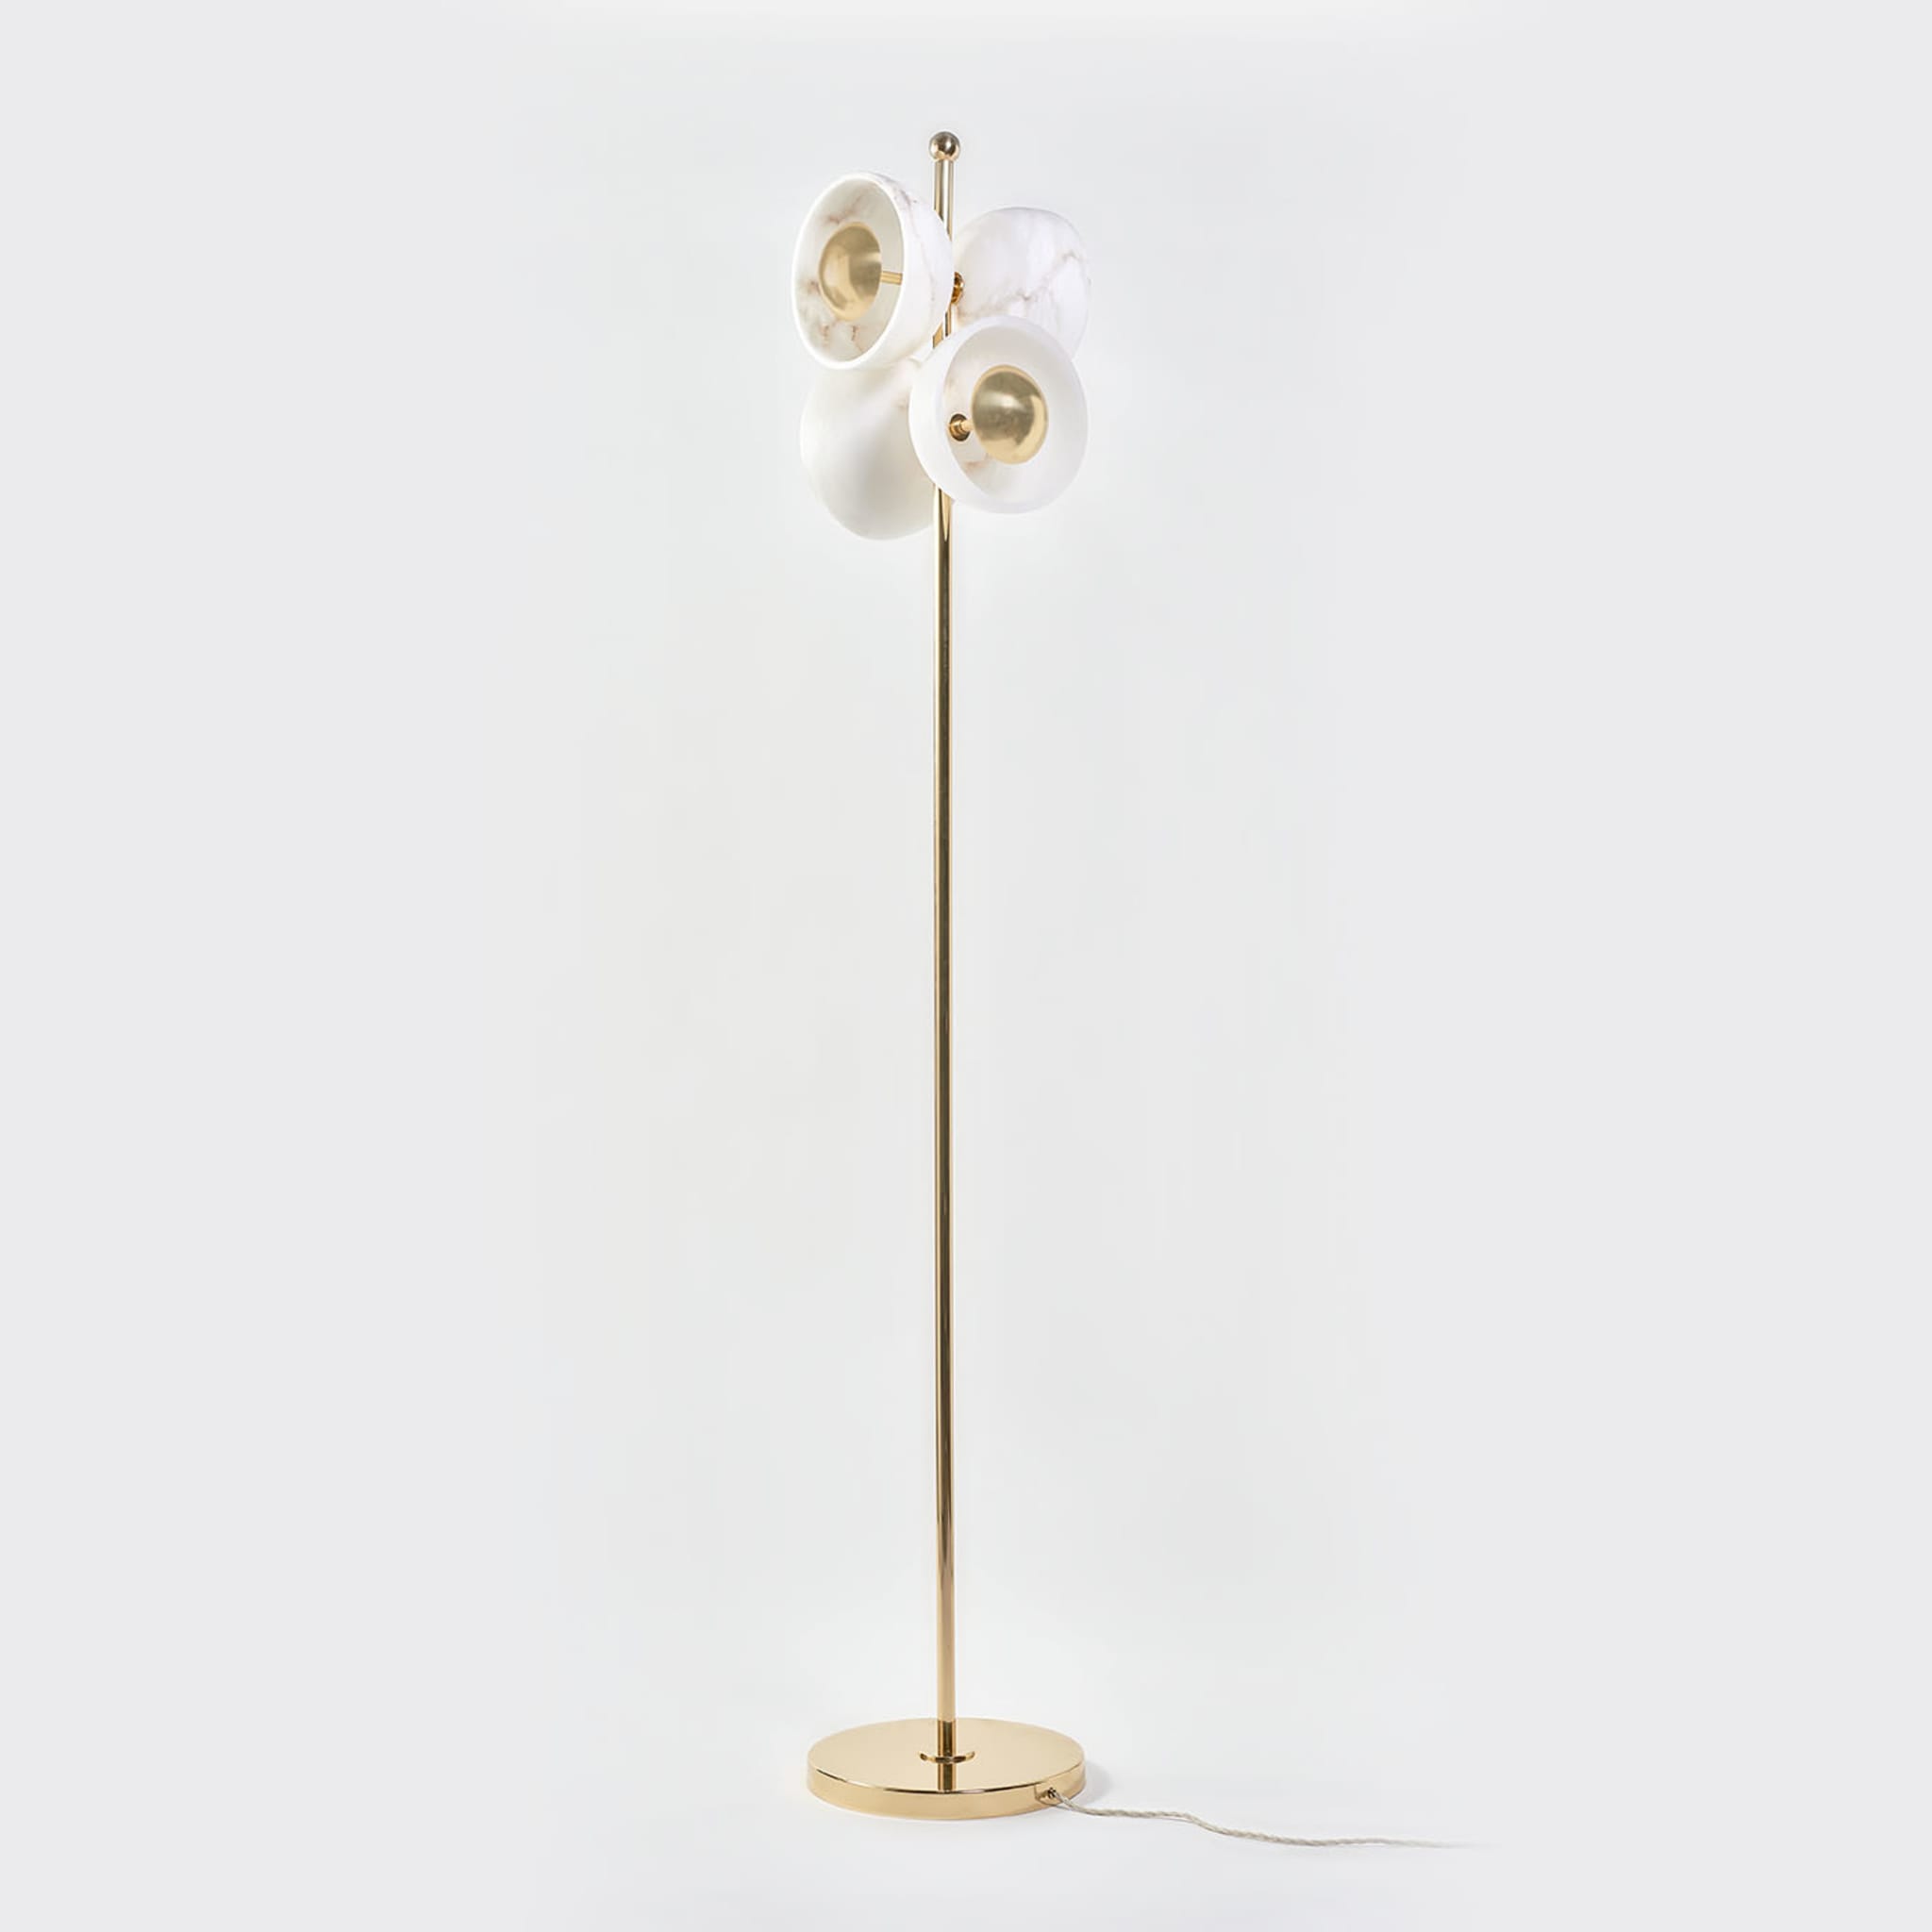 "Butterfly" Floor Lamp in Polished Brass and Alabaster - Alternative view 1